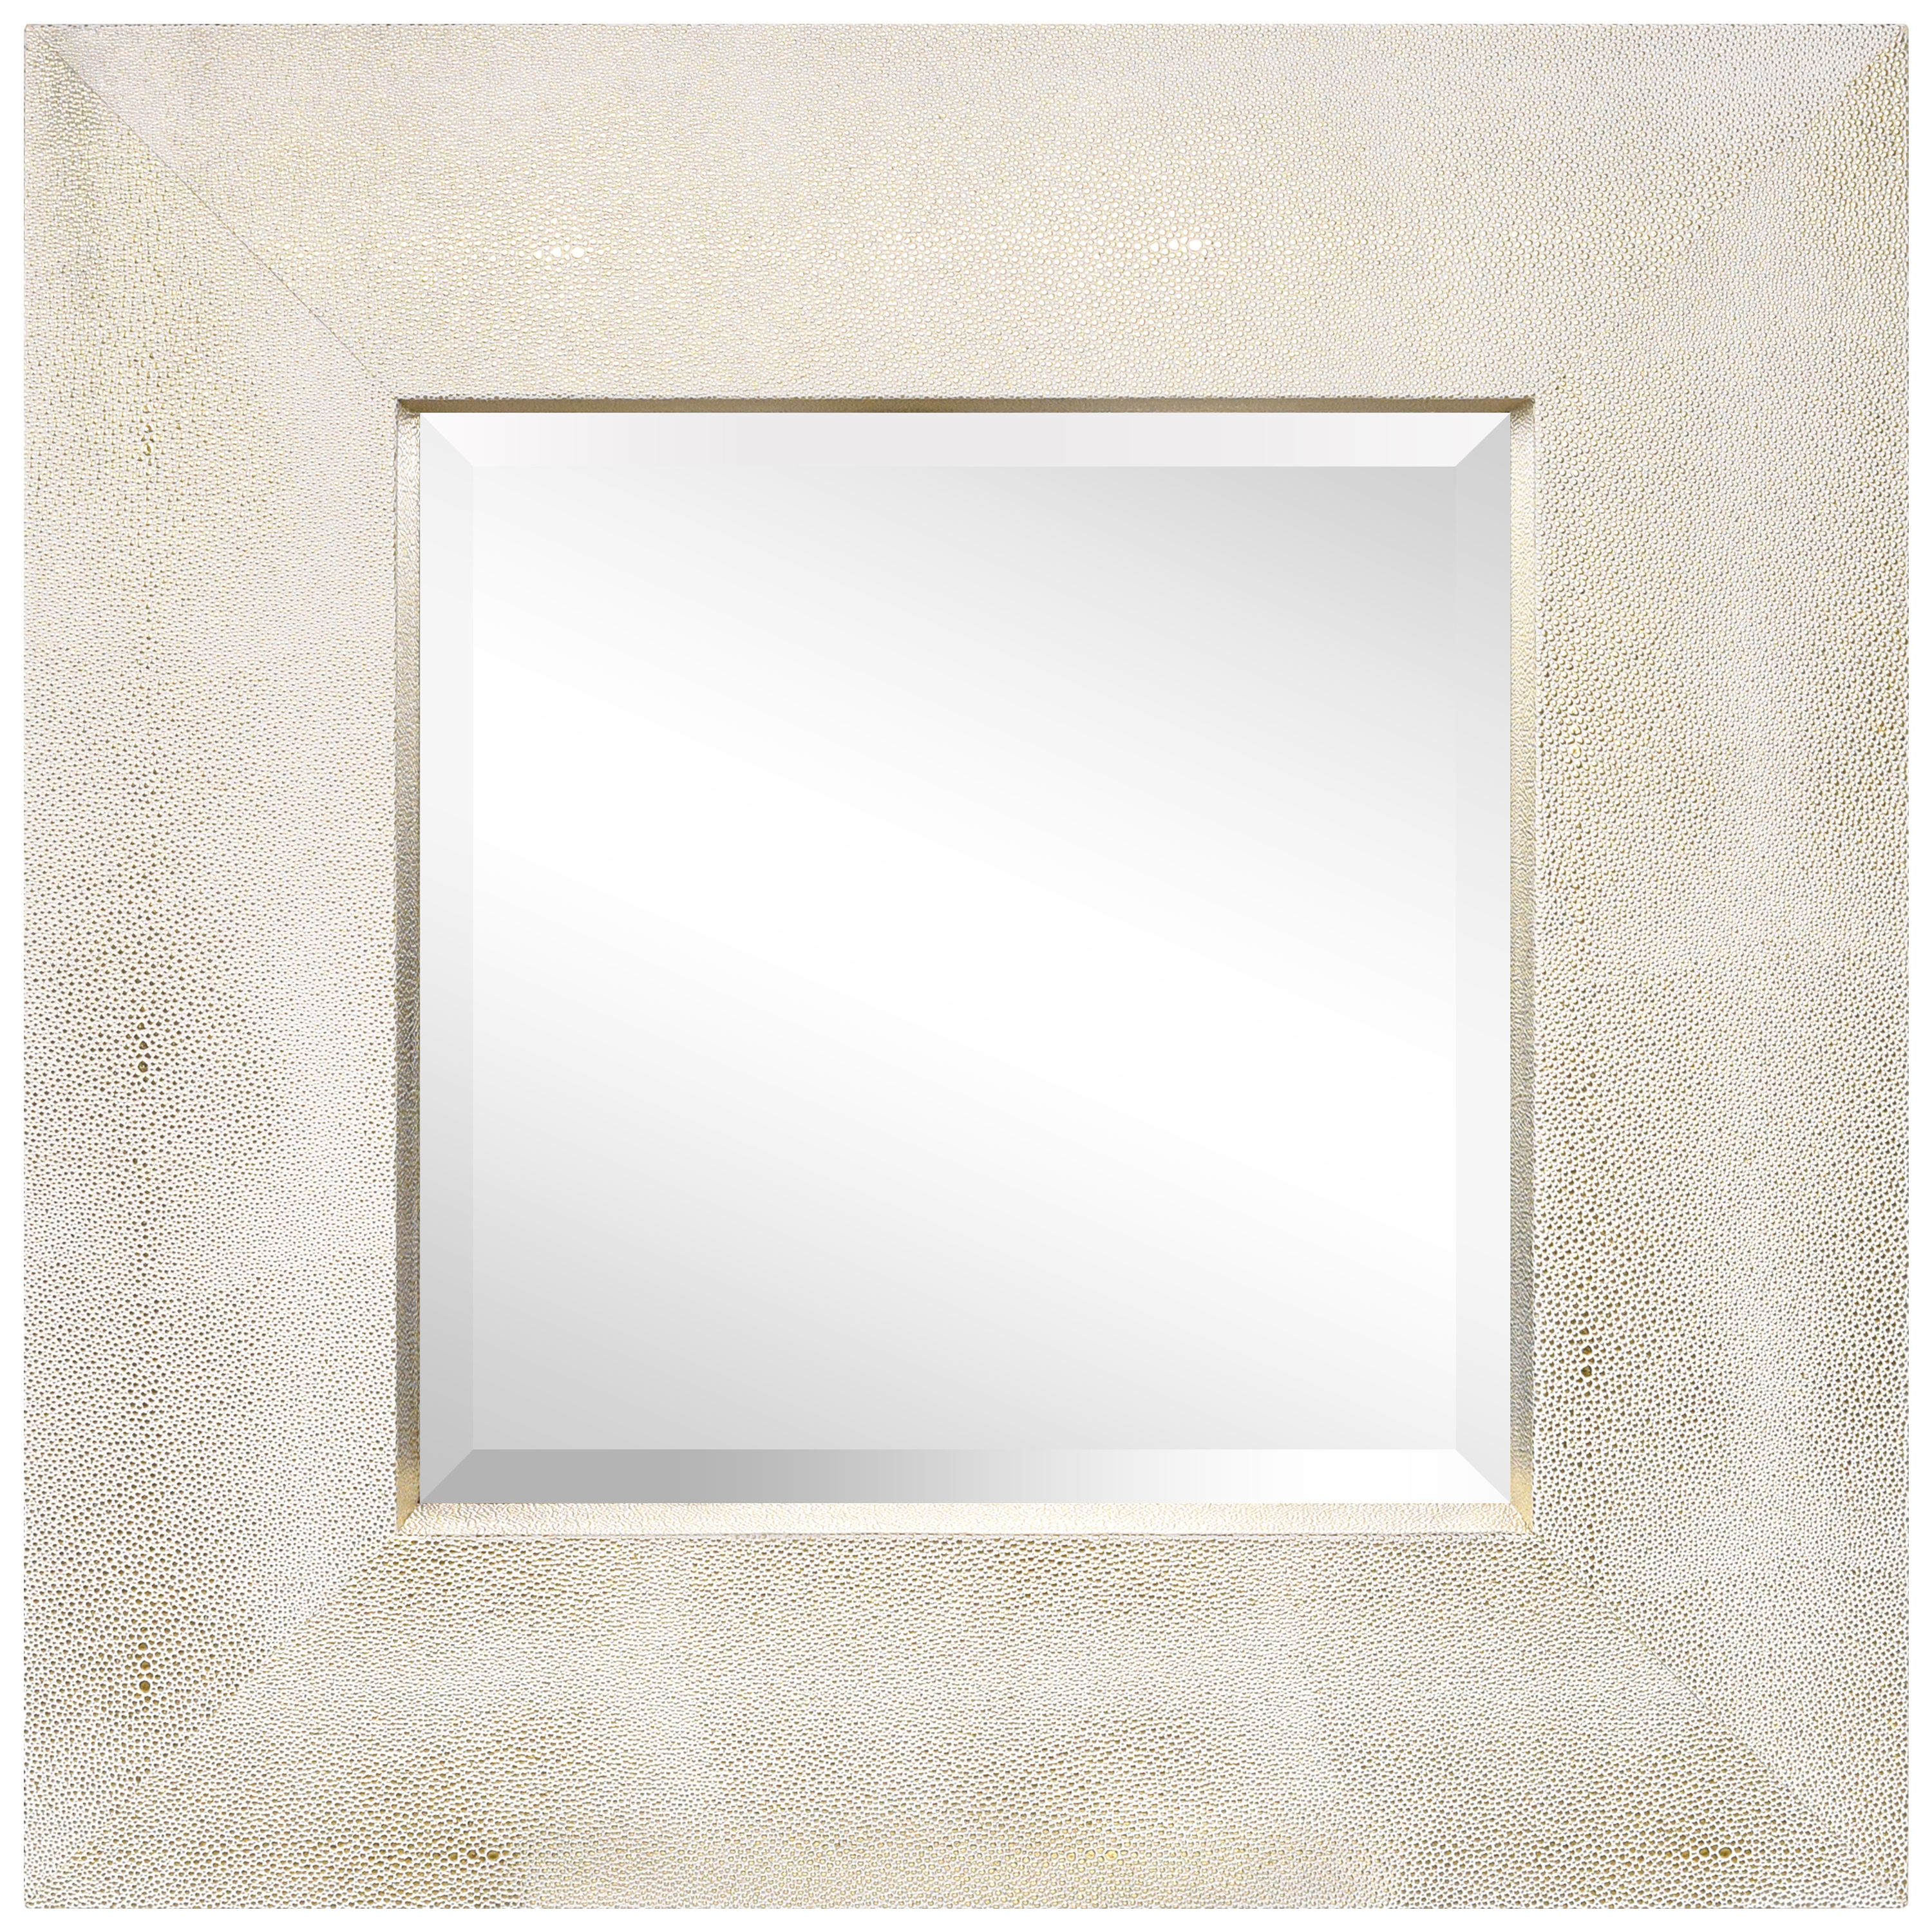 Elm-3030-01gw 30 X 30 In. Gold On White Metallic Shagreen Leather Framed Occasional Beveled Mirror